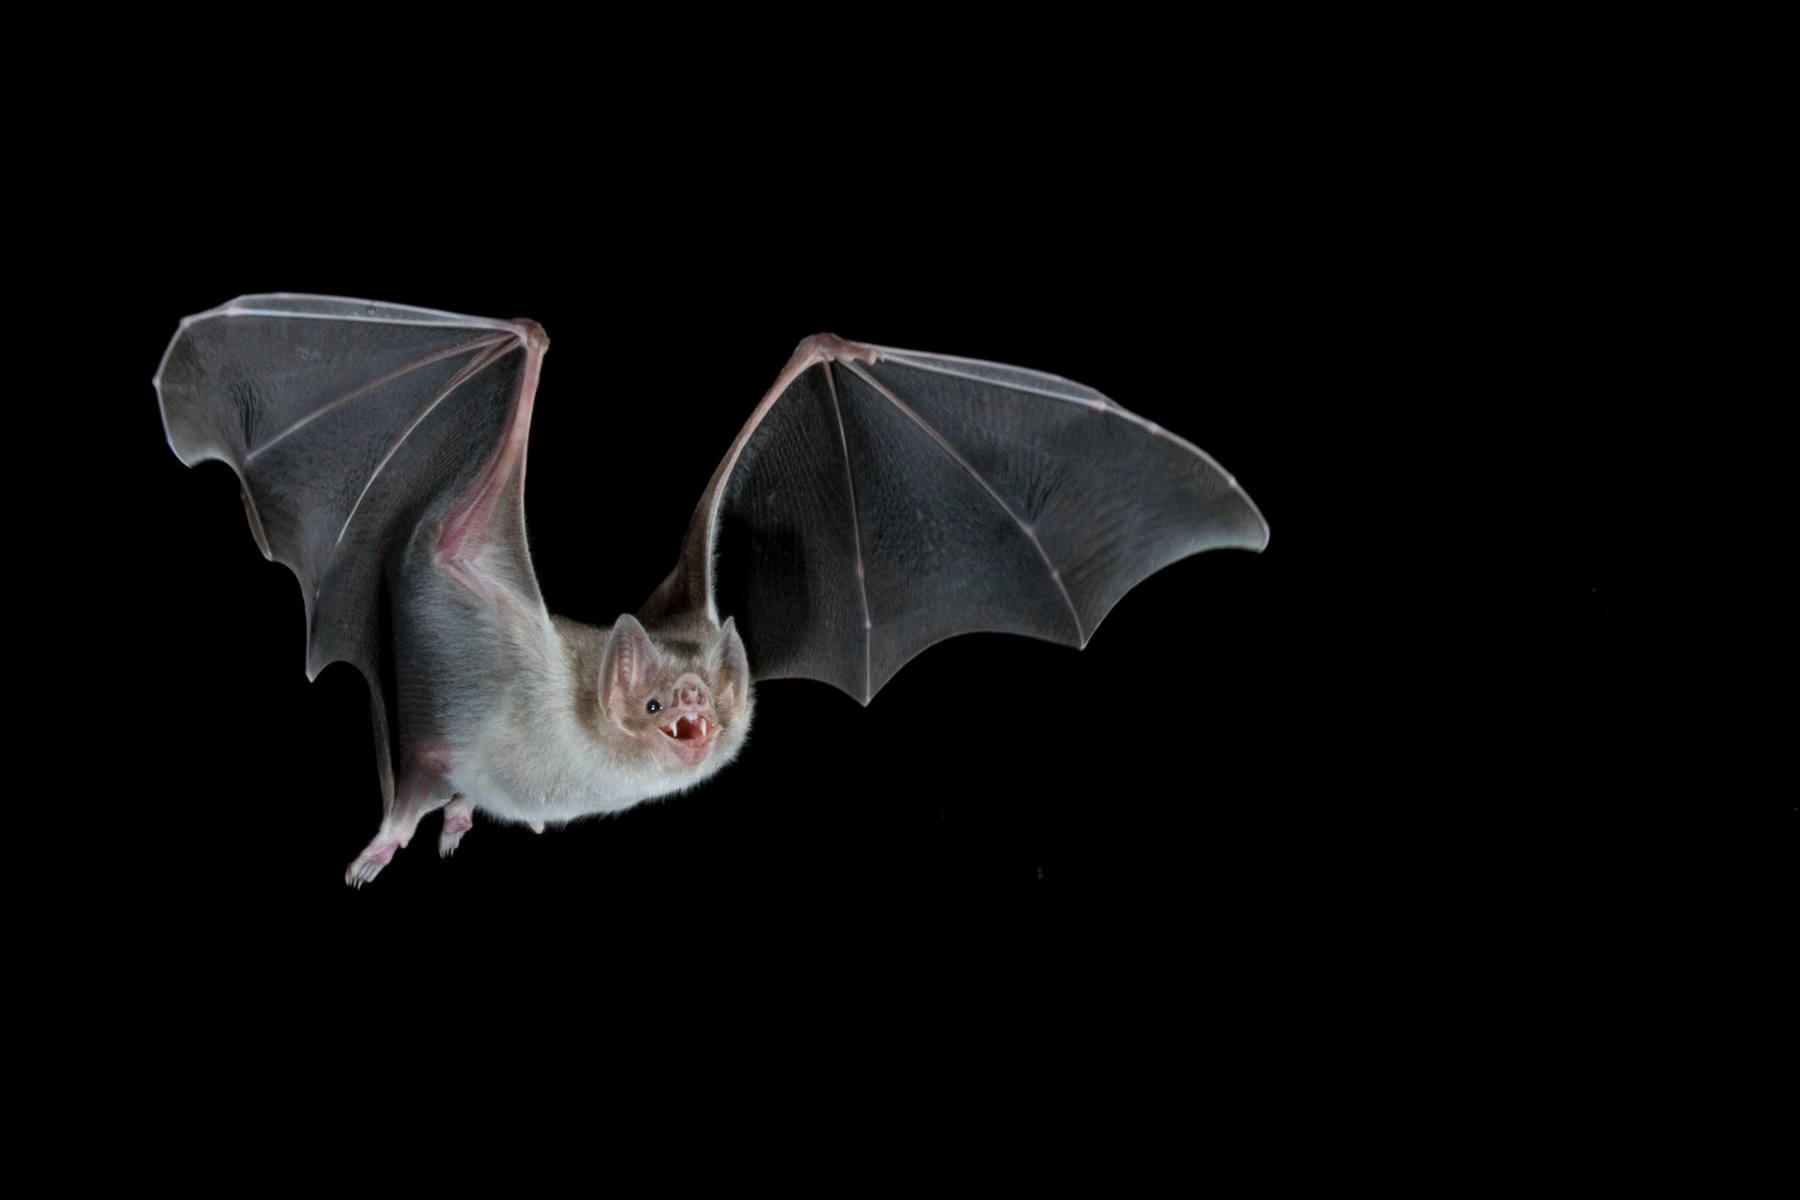 Vampire Bats Know Sharing Blood With Friends Is Good Manners